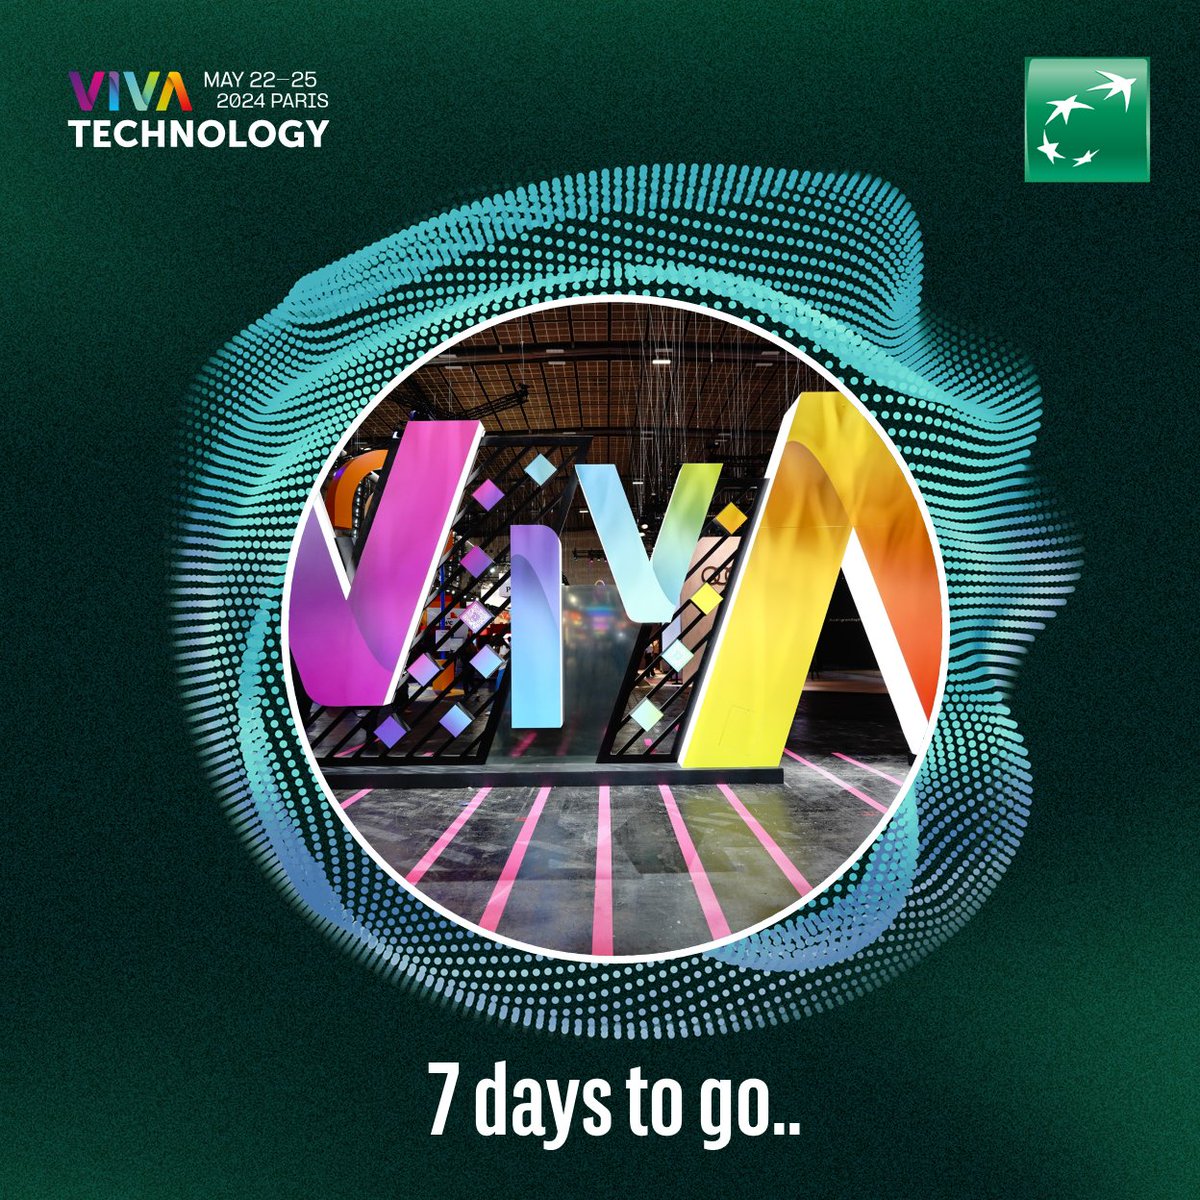 7 days left until #VivaTech, the biggest 🇪🇺 Tech event bringing together those who are shaping our daily lives. As founding partner, come join us via a dedicated stream during @VivaTech, featuring insights in #cybersecurity, #mobility, #payment & #AI. 🚀 Get ready! #BNPPforTech